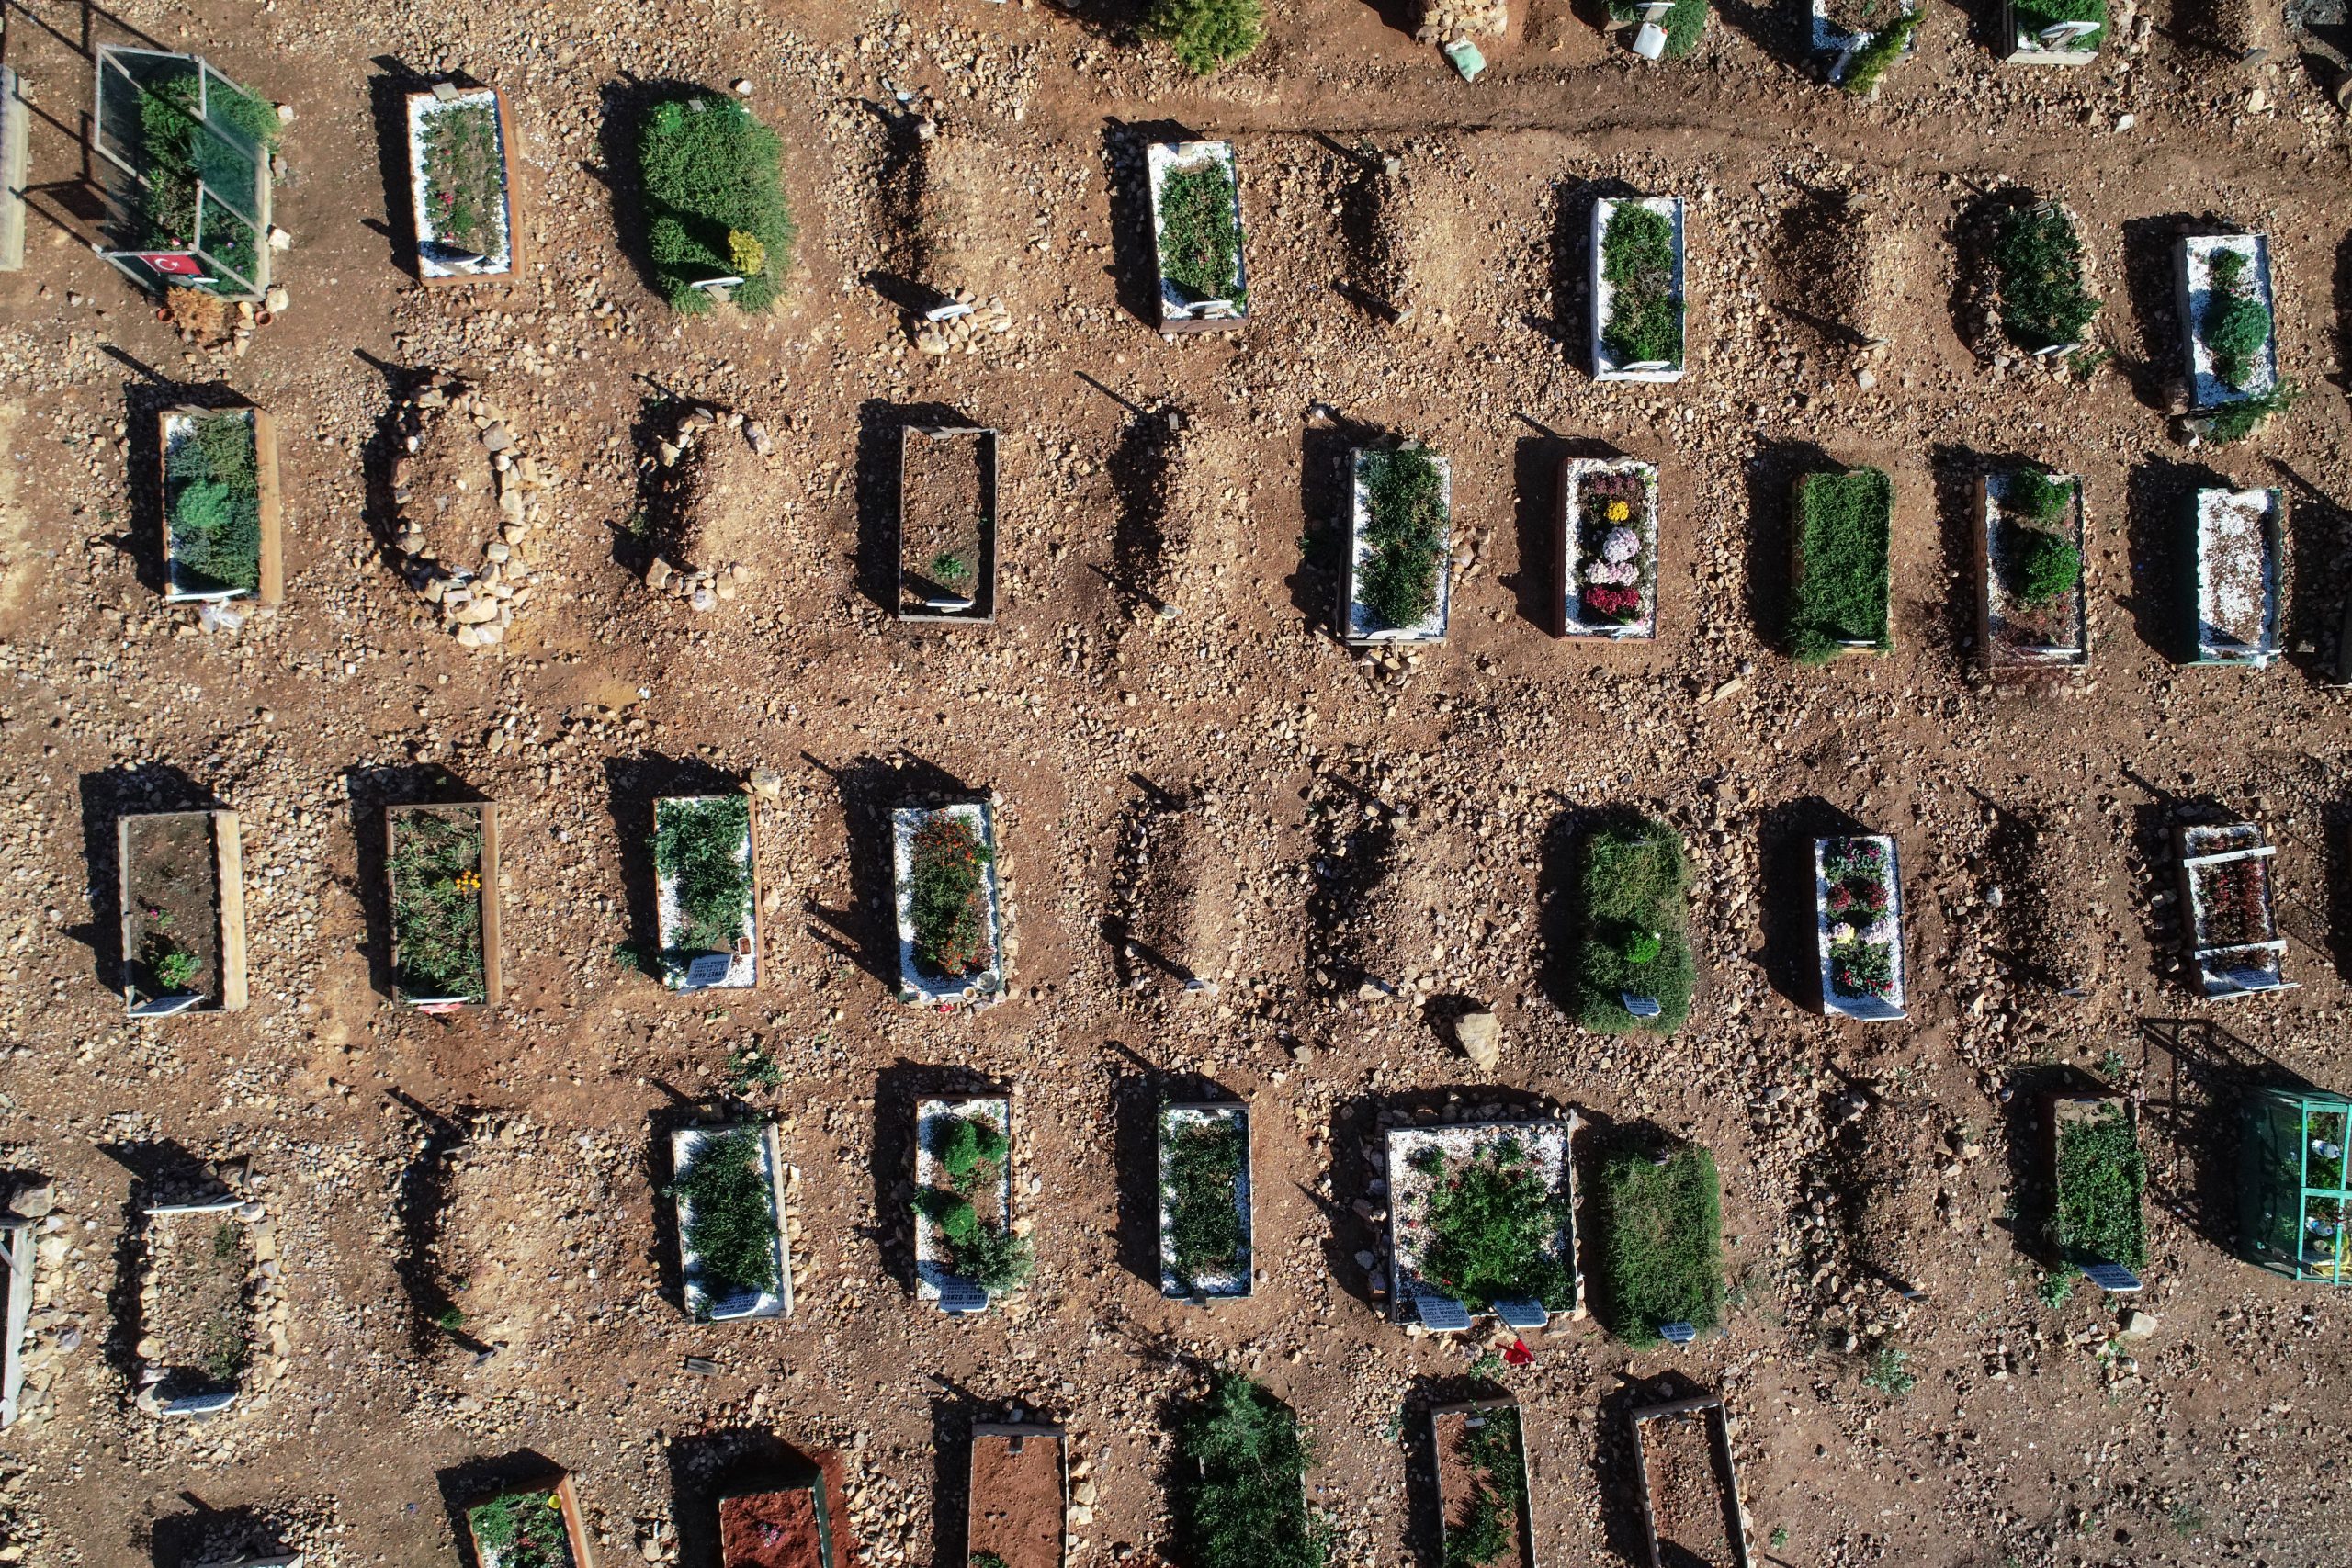 epa08837322 An aerial picture taken by drone shows newly buried graves of Covid-19 victims at the Baklaci cemetery in Istanbul, Turkey, 23 November 2020.  Istanbul mayor Ekrem Imamoglu said that 184 people died due to Covid-19 in Istanbul on 22 November 2020. The Turkish government has introduced partial curfews and other measures to curb increasing COVID-19 cases in the country, while health experts call for a full lockdown and more transparency in pandemic data.  EPA/ERDEM SAHIN